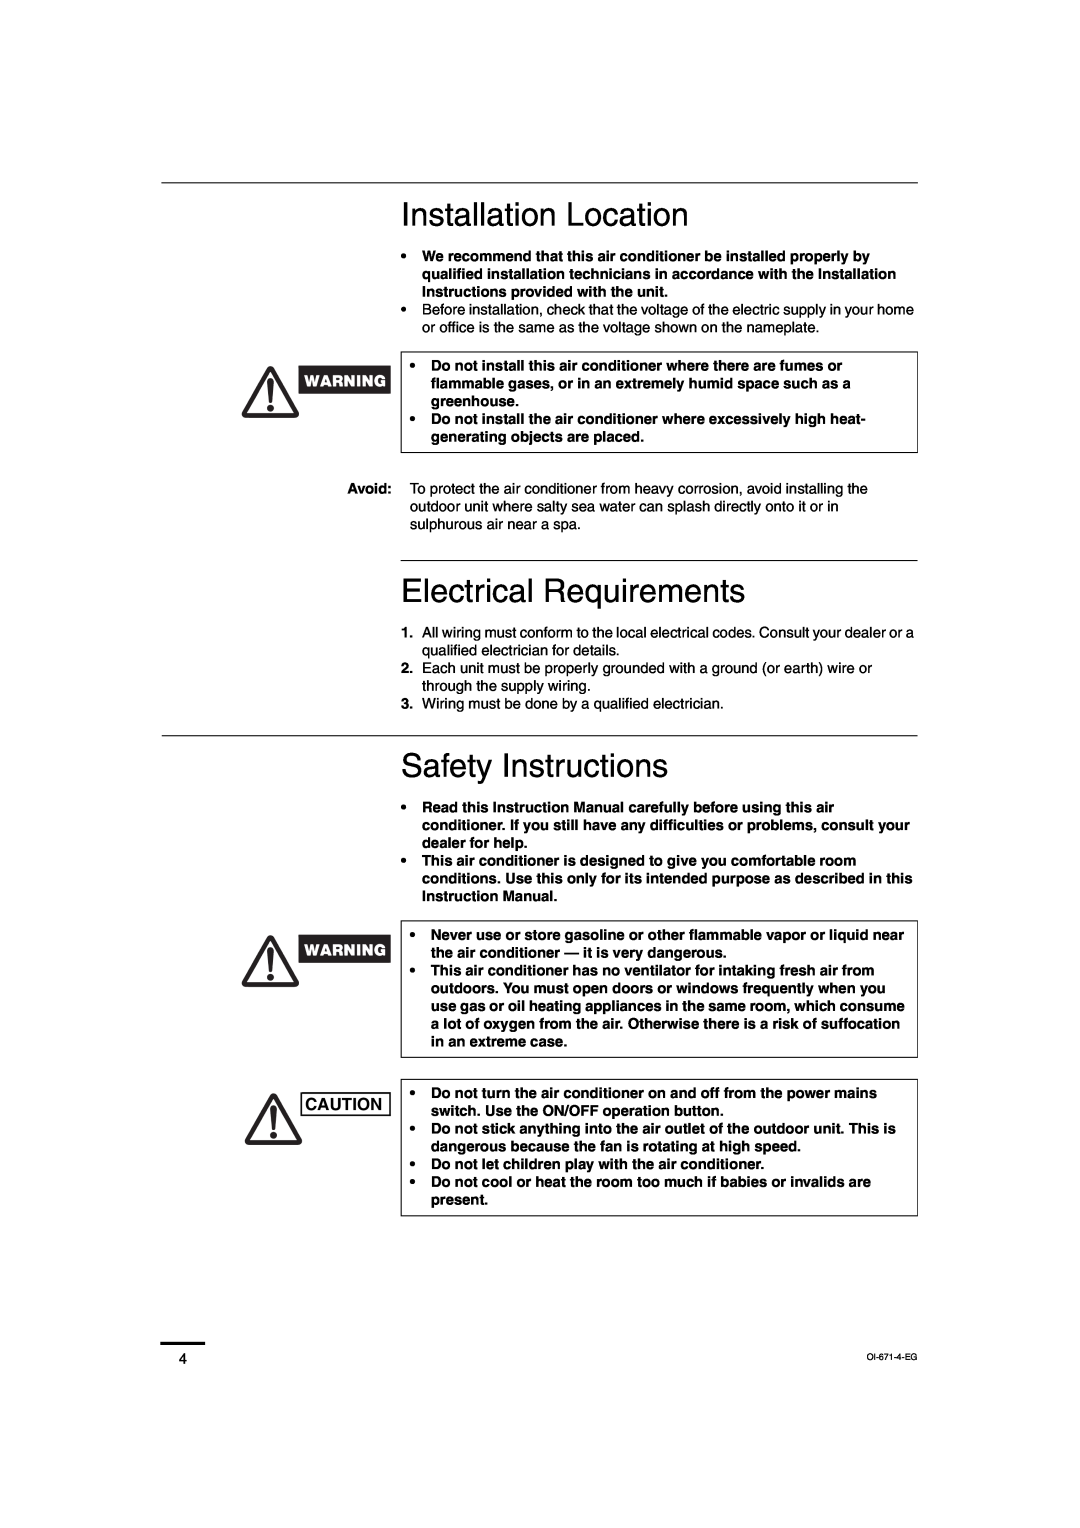 Sanyo SAP-CRV93EH, SAP-KRV123EH, SAP-KRV93EH Installation Location, Electrical Requirements, Safety Instructions 